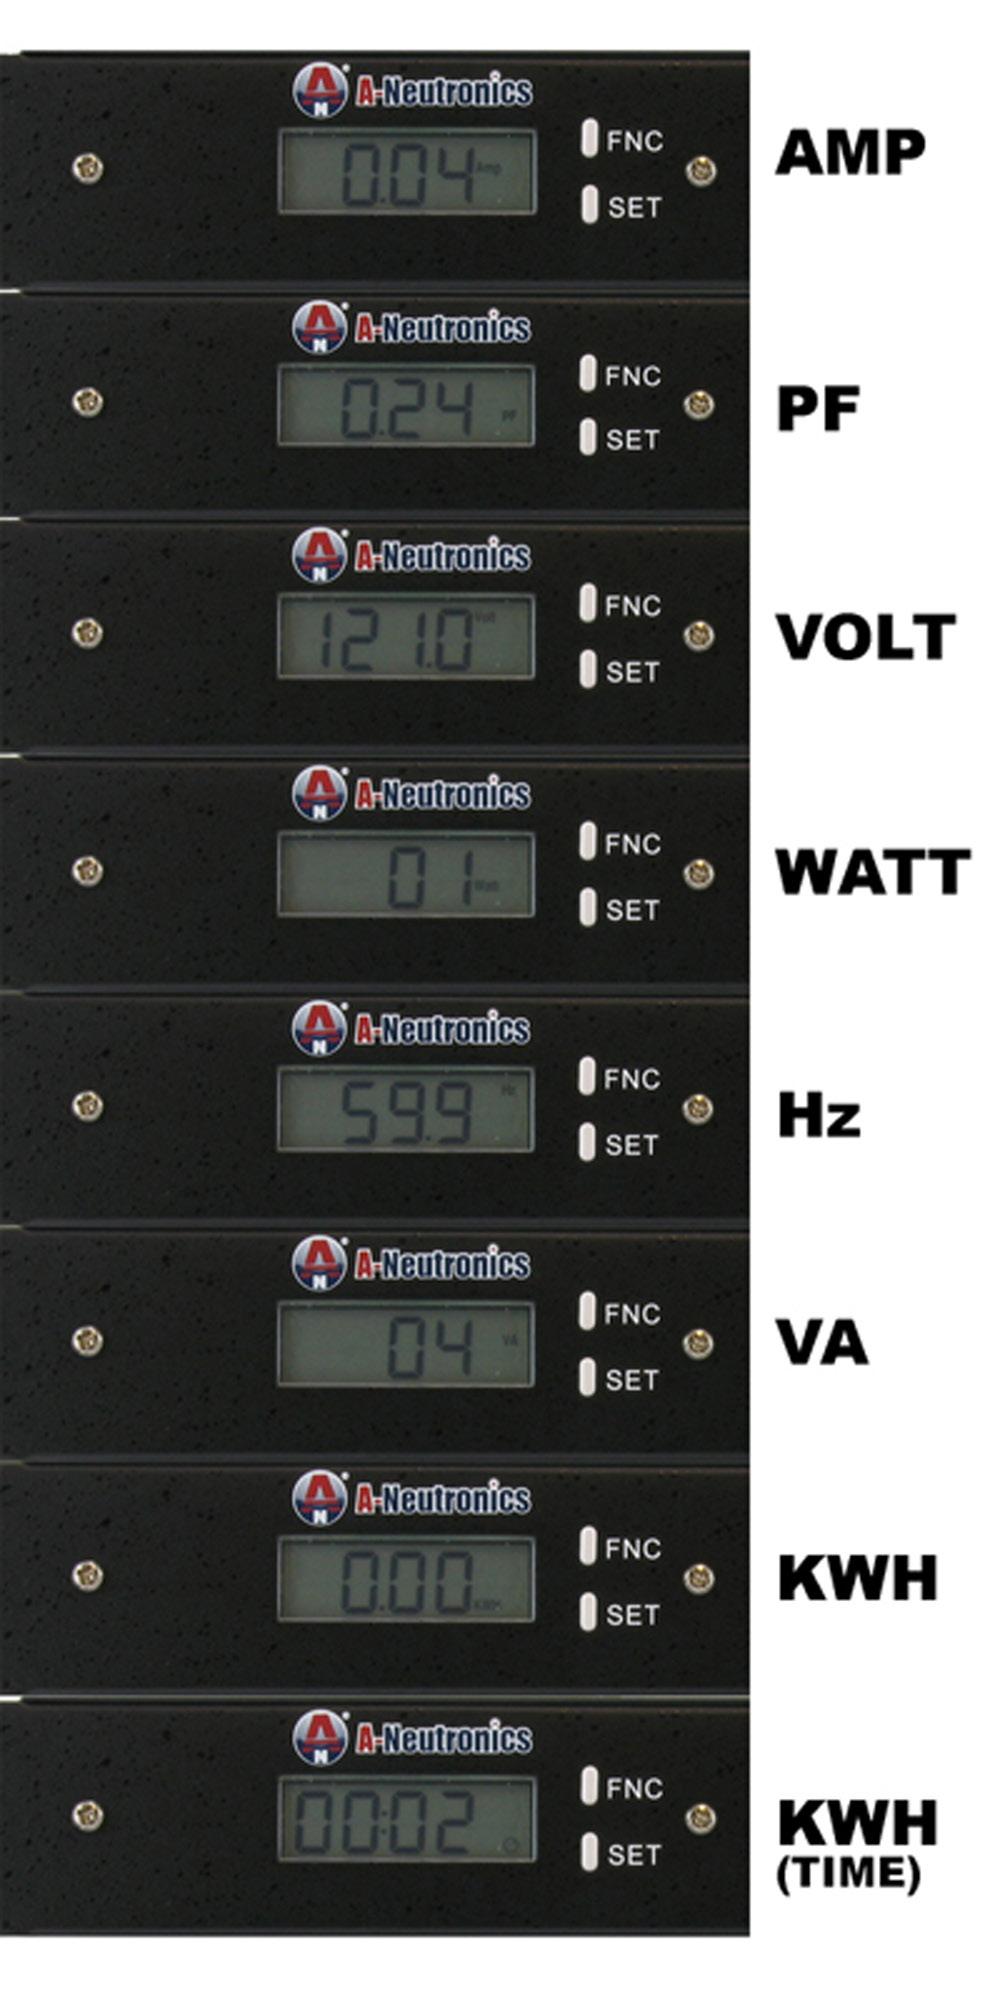 LCD Display Meter Function Meter function (8) Functions Provided Plug in the power strip and it starts to display current power supply status Voltage Amp Watt VA Hz PF Kwh Runtime Clock No start